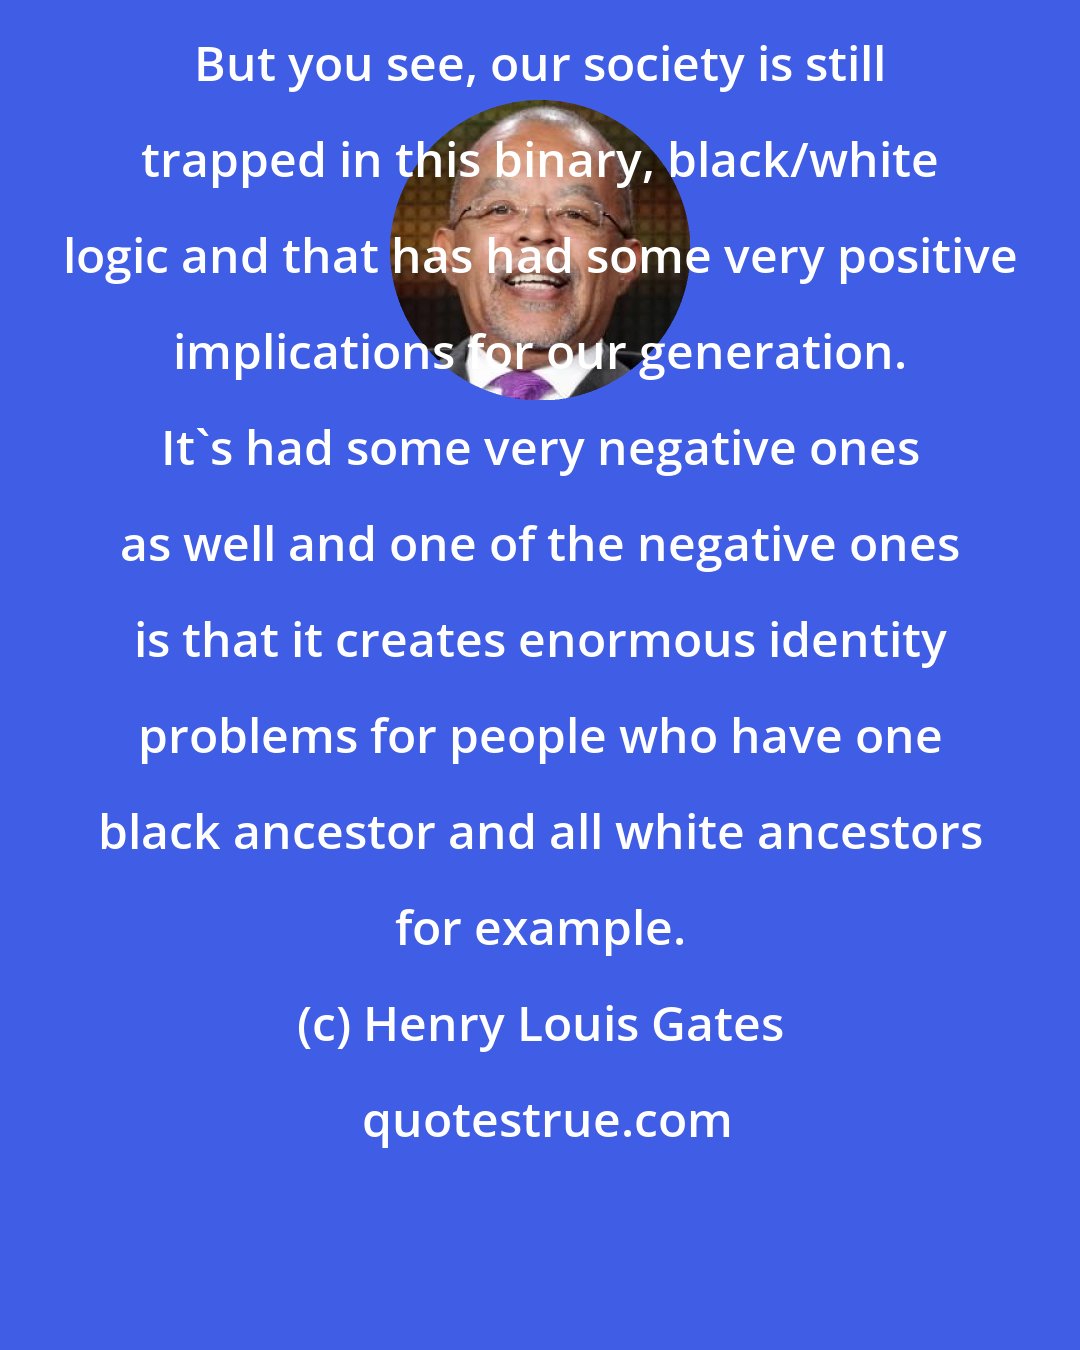 Henry Louis Gates: But you see, our society is still trapped in this binary, black/white logic and that has had some very positive implications for our generation. It's had some very negative ones as well and one of the negative ones is that it creates enormous identity problems for people who have one black ancestor and all white ancestors for example.